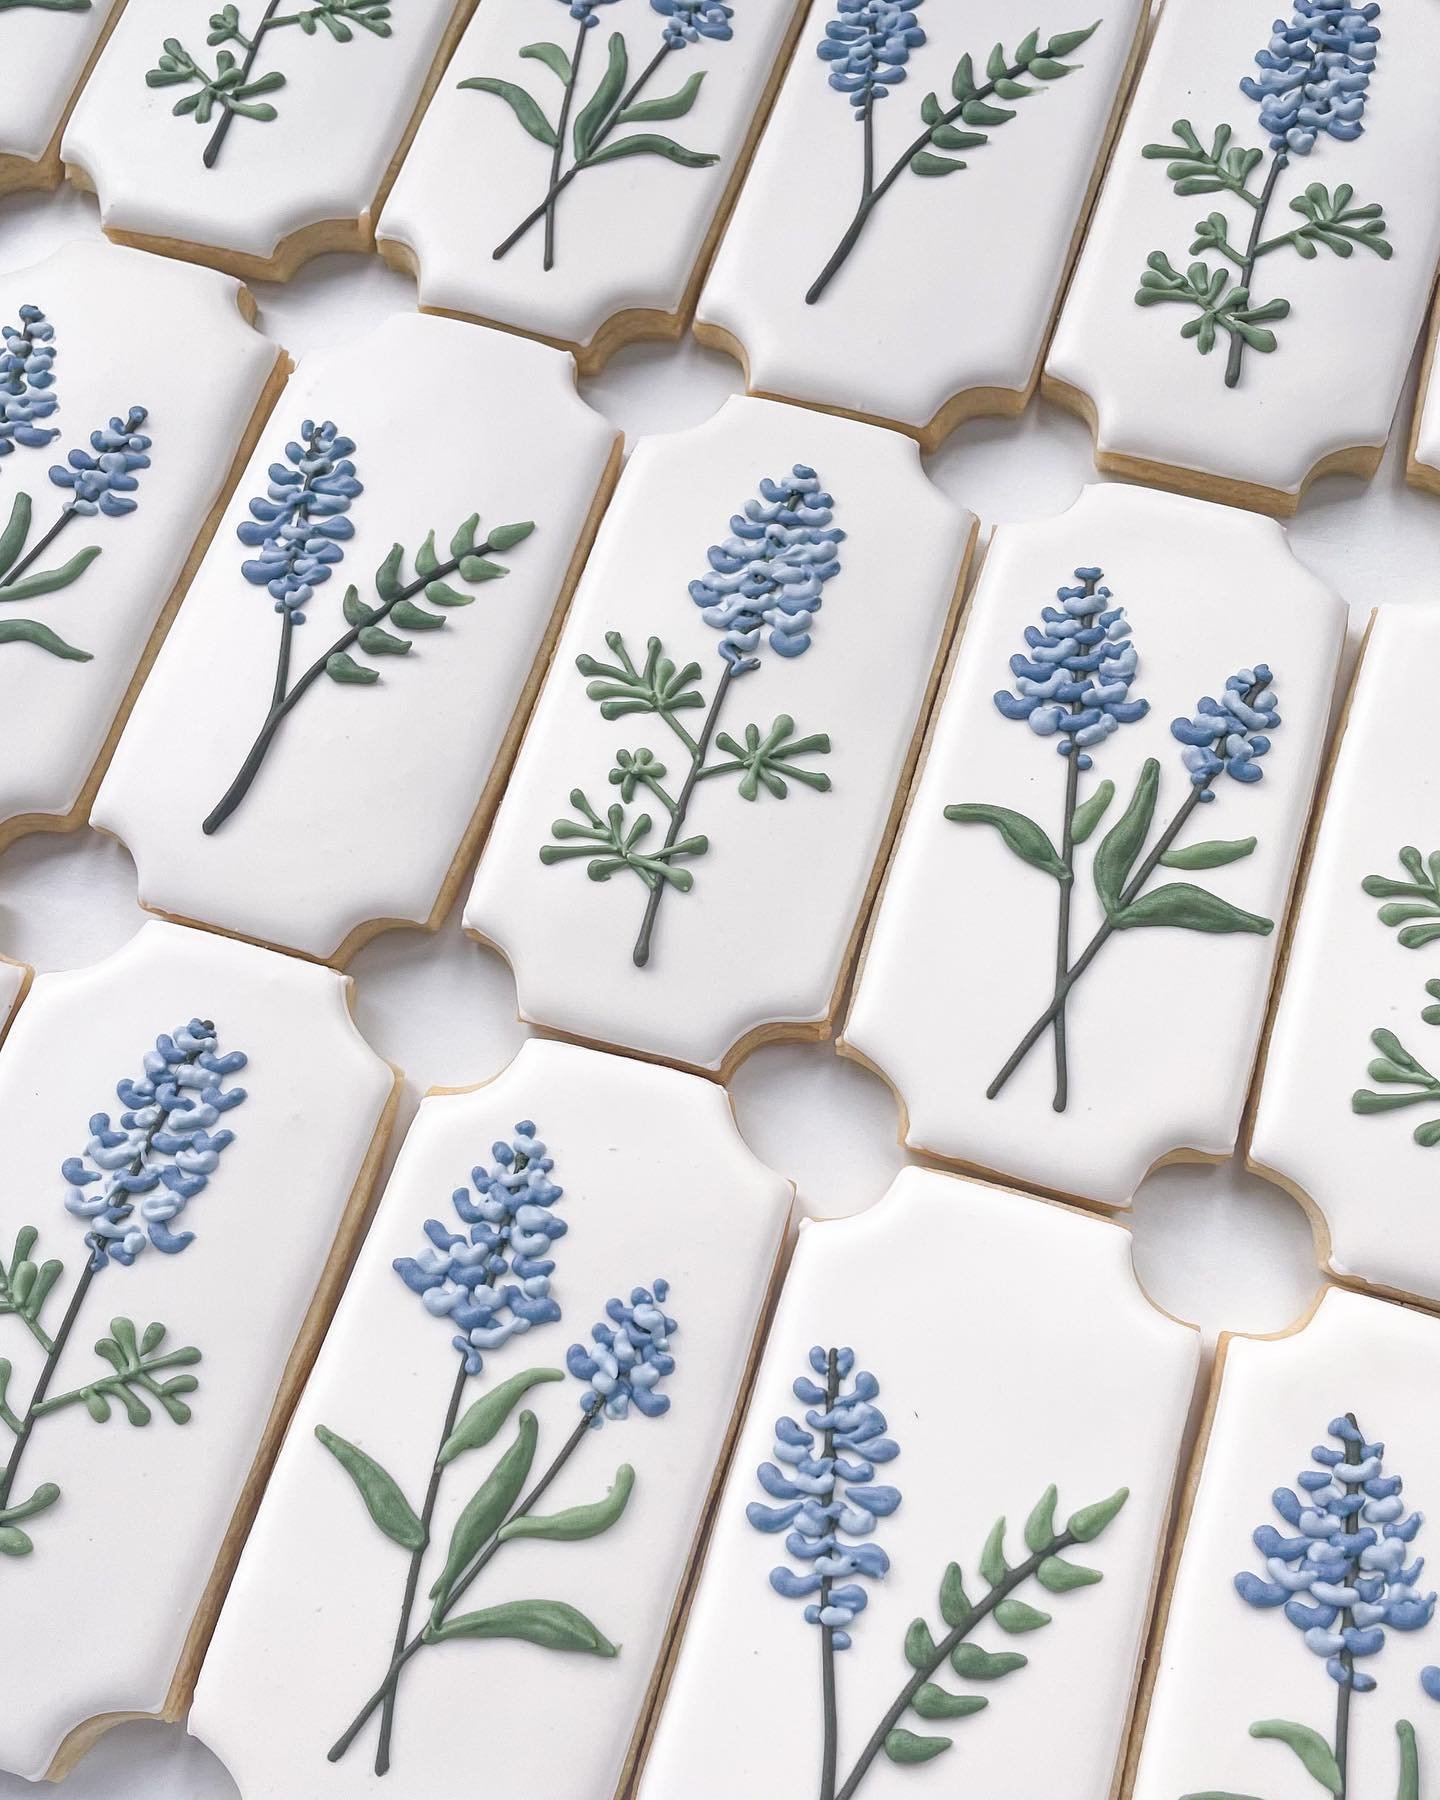 These sweet little Texas bluebonnets were on repeat in the kitchen recently. And I definitely had &ldquo;Cowboy Take Me Away&rdquo; stuck in my head the entire time. 

#bluebonnetcookies #flowercookies #royalicingcookies